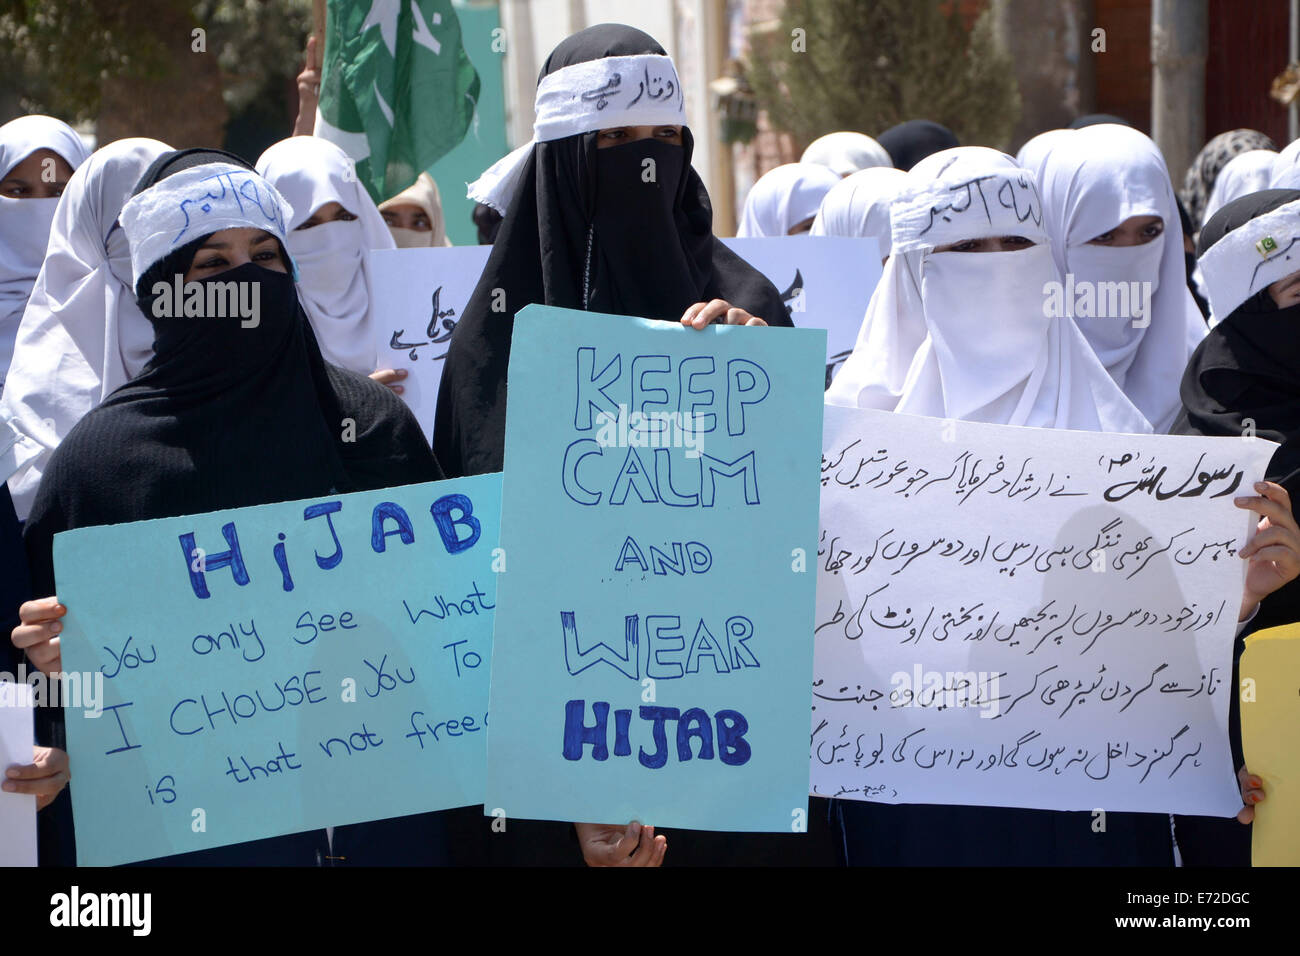 Quetta. 4th Sep, 2014. Pakistani women covering their faces with Hijab hold placards during a rally to mark World Hijab Day in southwest Pakistan's Quetta, Sept. 4, 2014. Nationwide rallies were organized to highlight the importance and value of hijab for Muslim women in Pakistan. Credit:  Asad/Xinhua/Alamy Live News Stock Photo